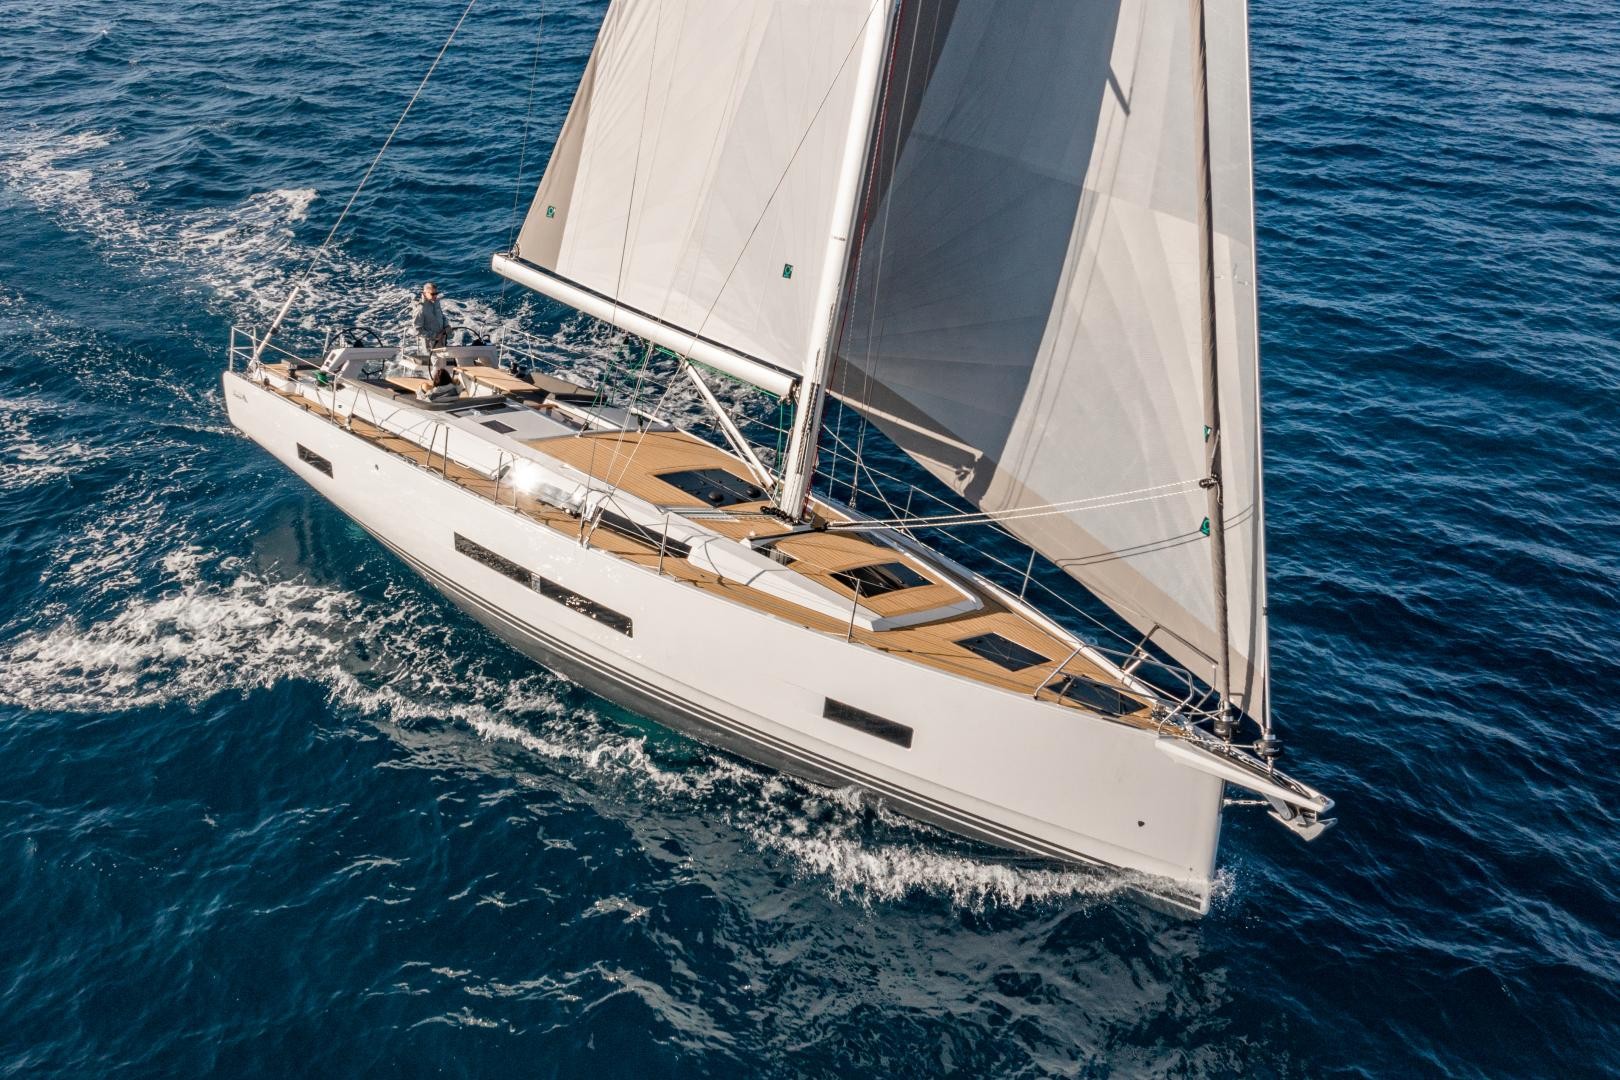 The Hanse 460 has been named European Yacht of the Year 2022